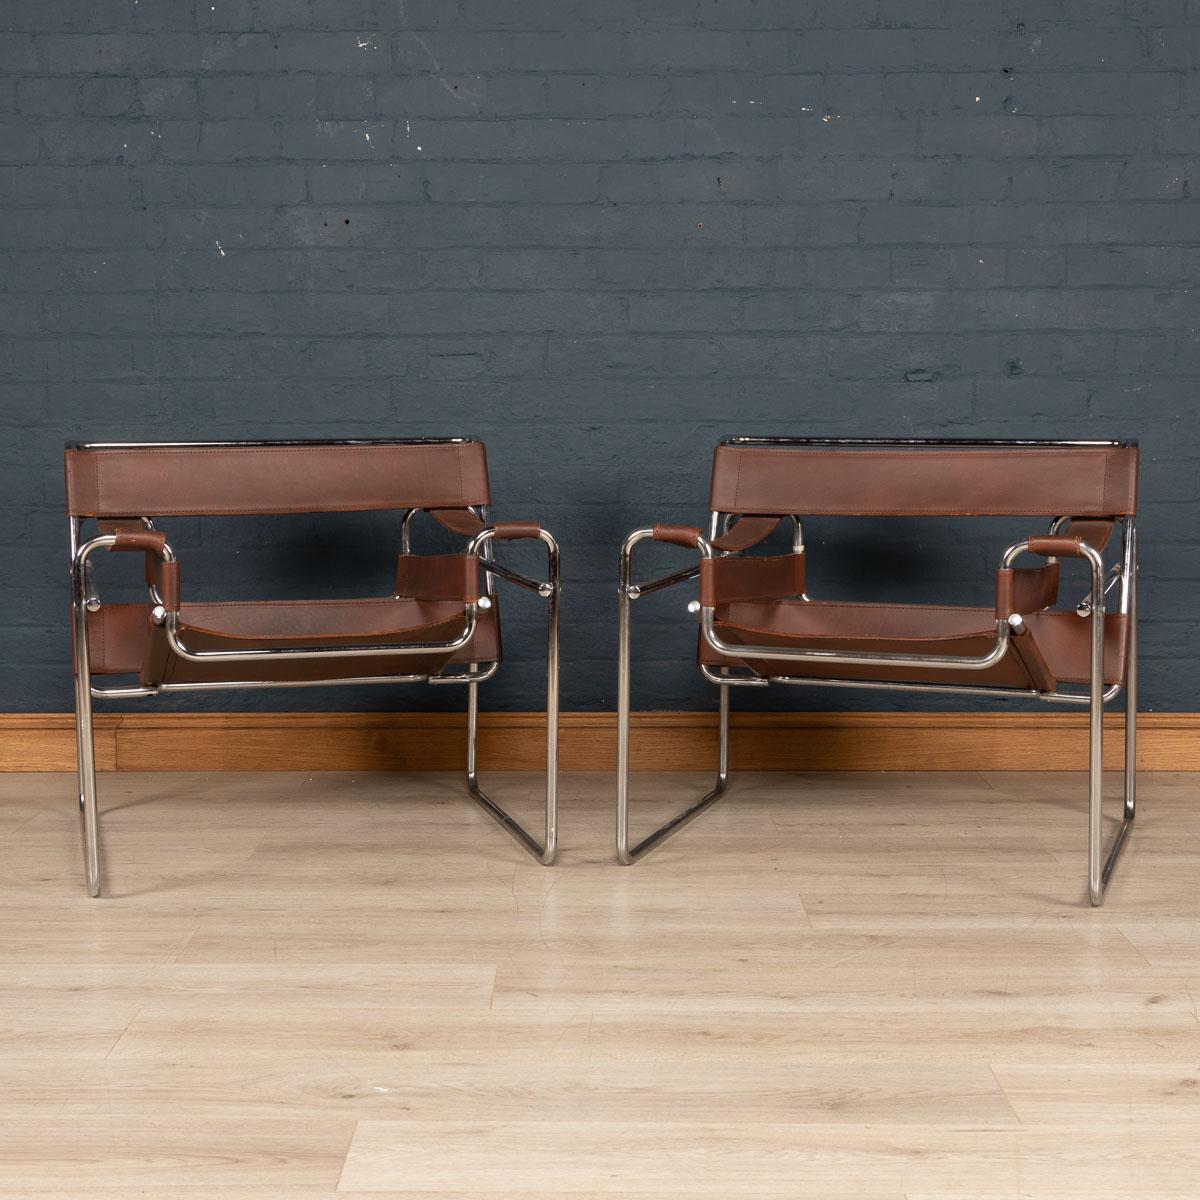 A lovely pair of Wassily armchairs in leather and chrome plated frames. These chairs produced by Knoll are replicas of the original of the iconic Wassily chair, also known as Model B3. The chairs were designed in 1925–1926 by Marcel Breuer while he